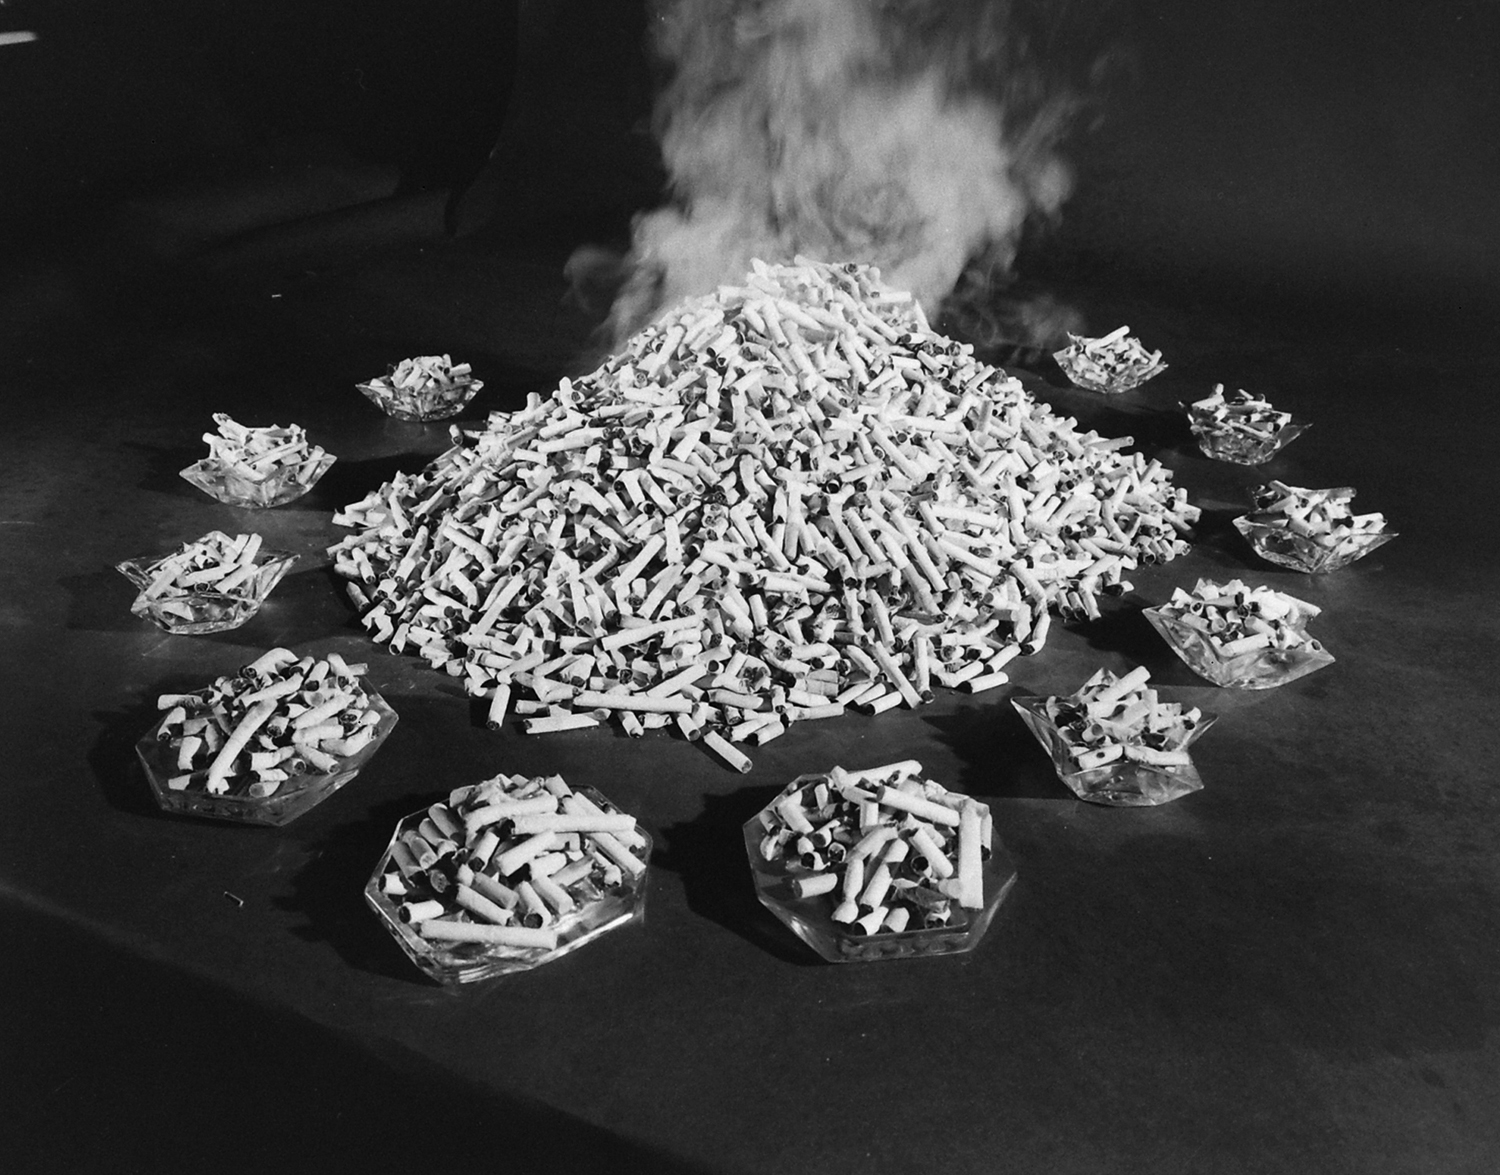 Photo made around the time of the Surgeon General's 1964 report on smoking and health.